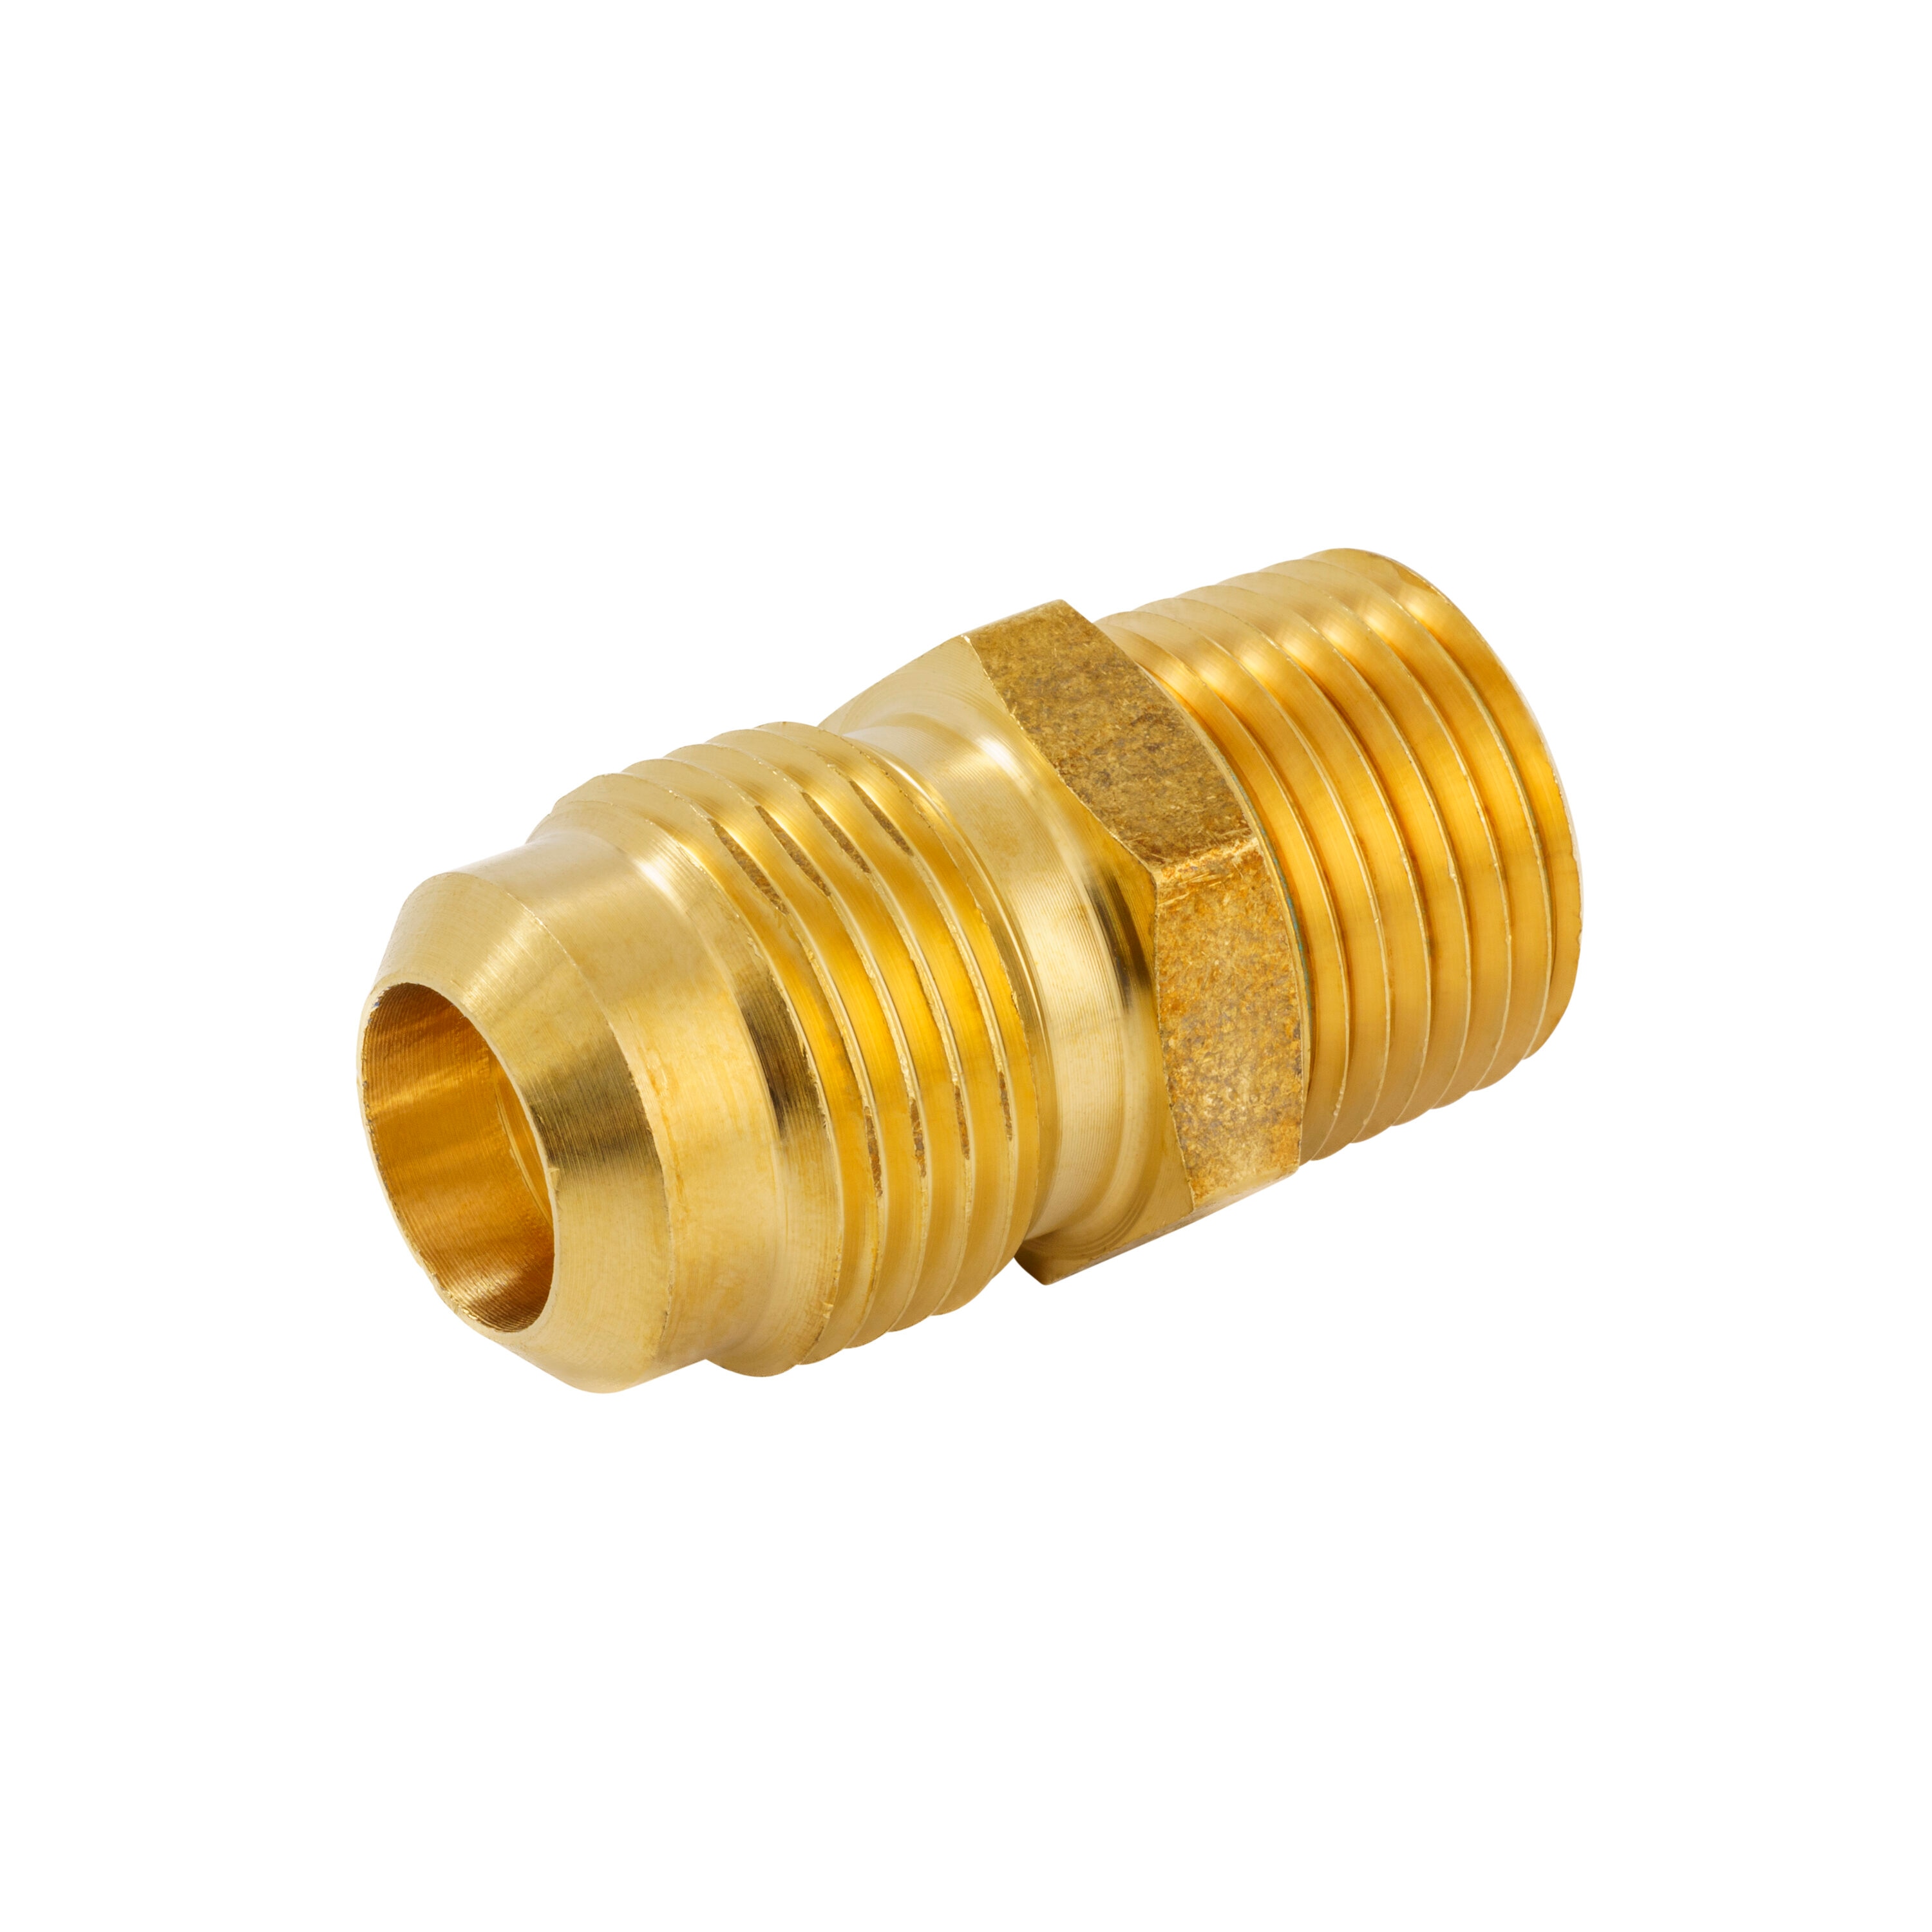 Proline Series 5/8-in x 1/2-in Threaded Union Fitting